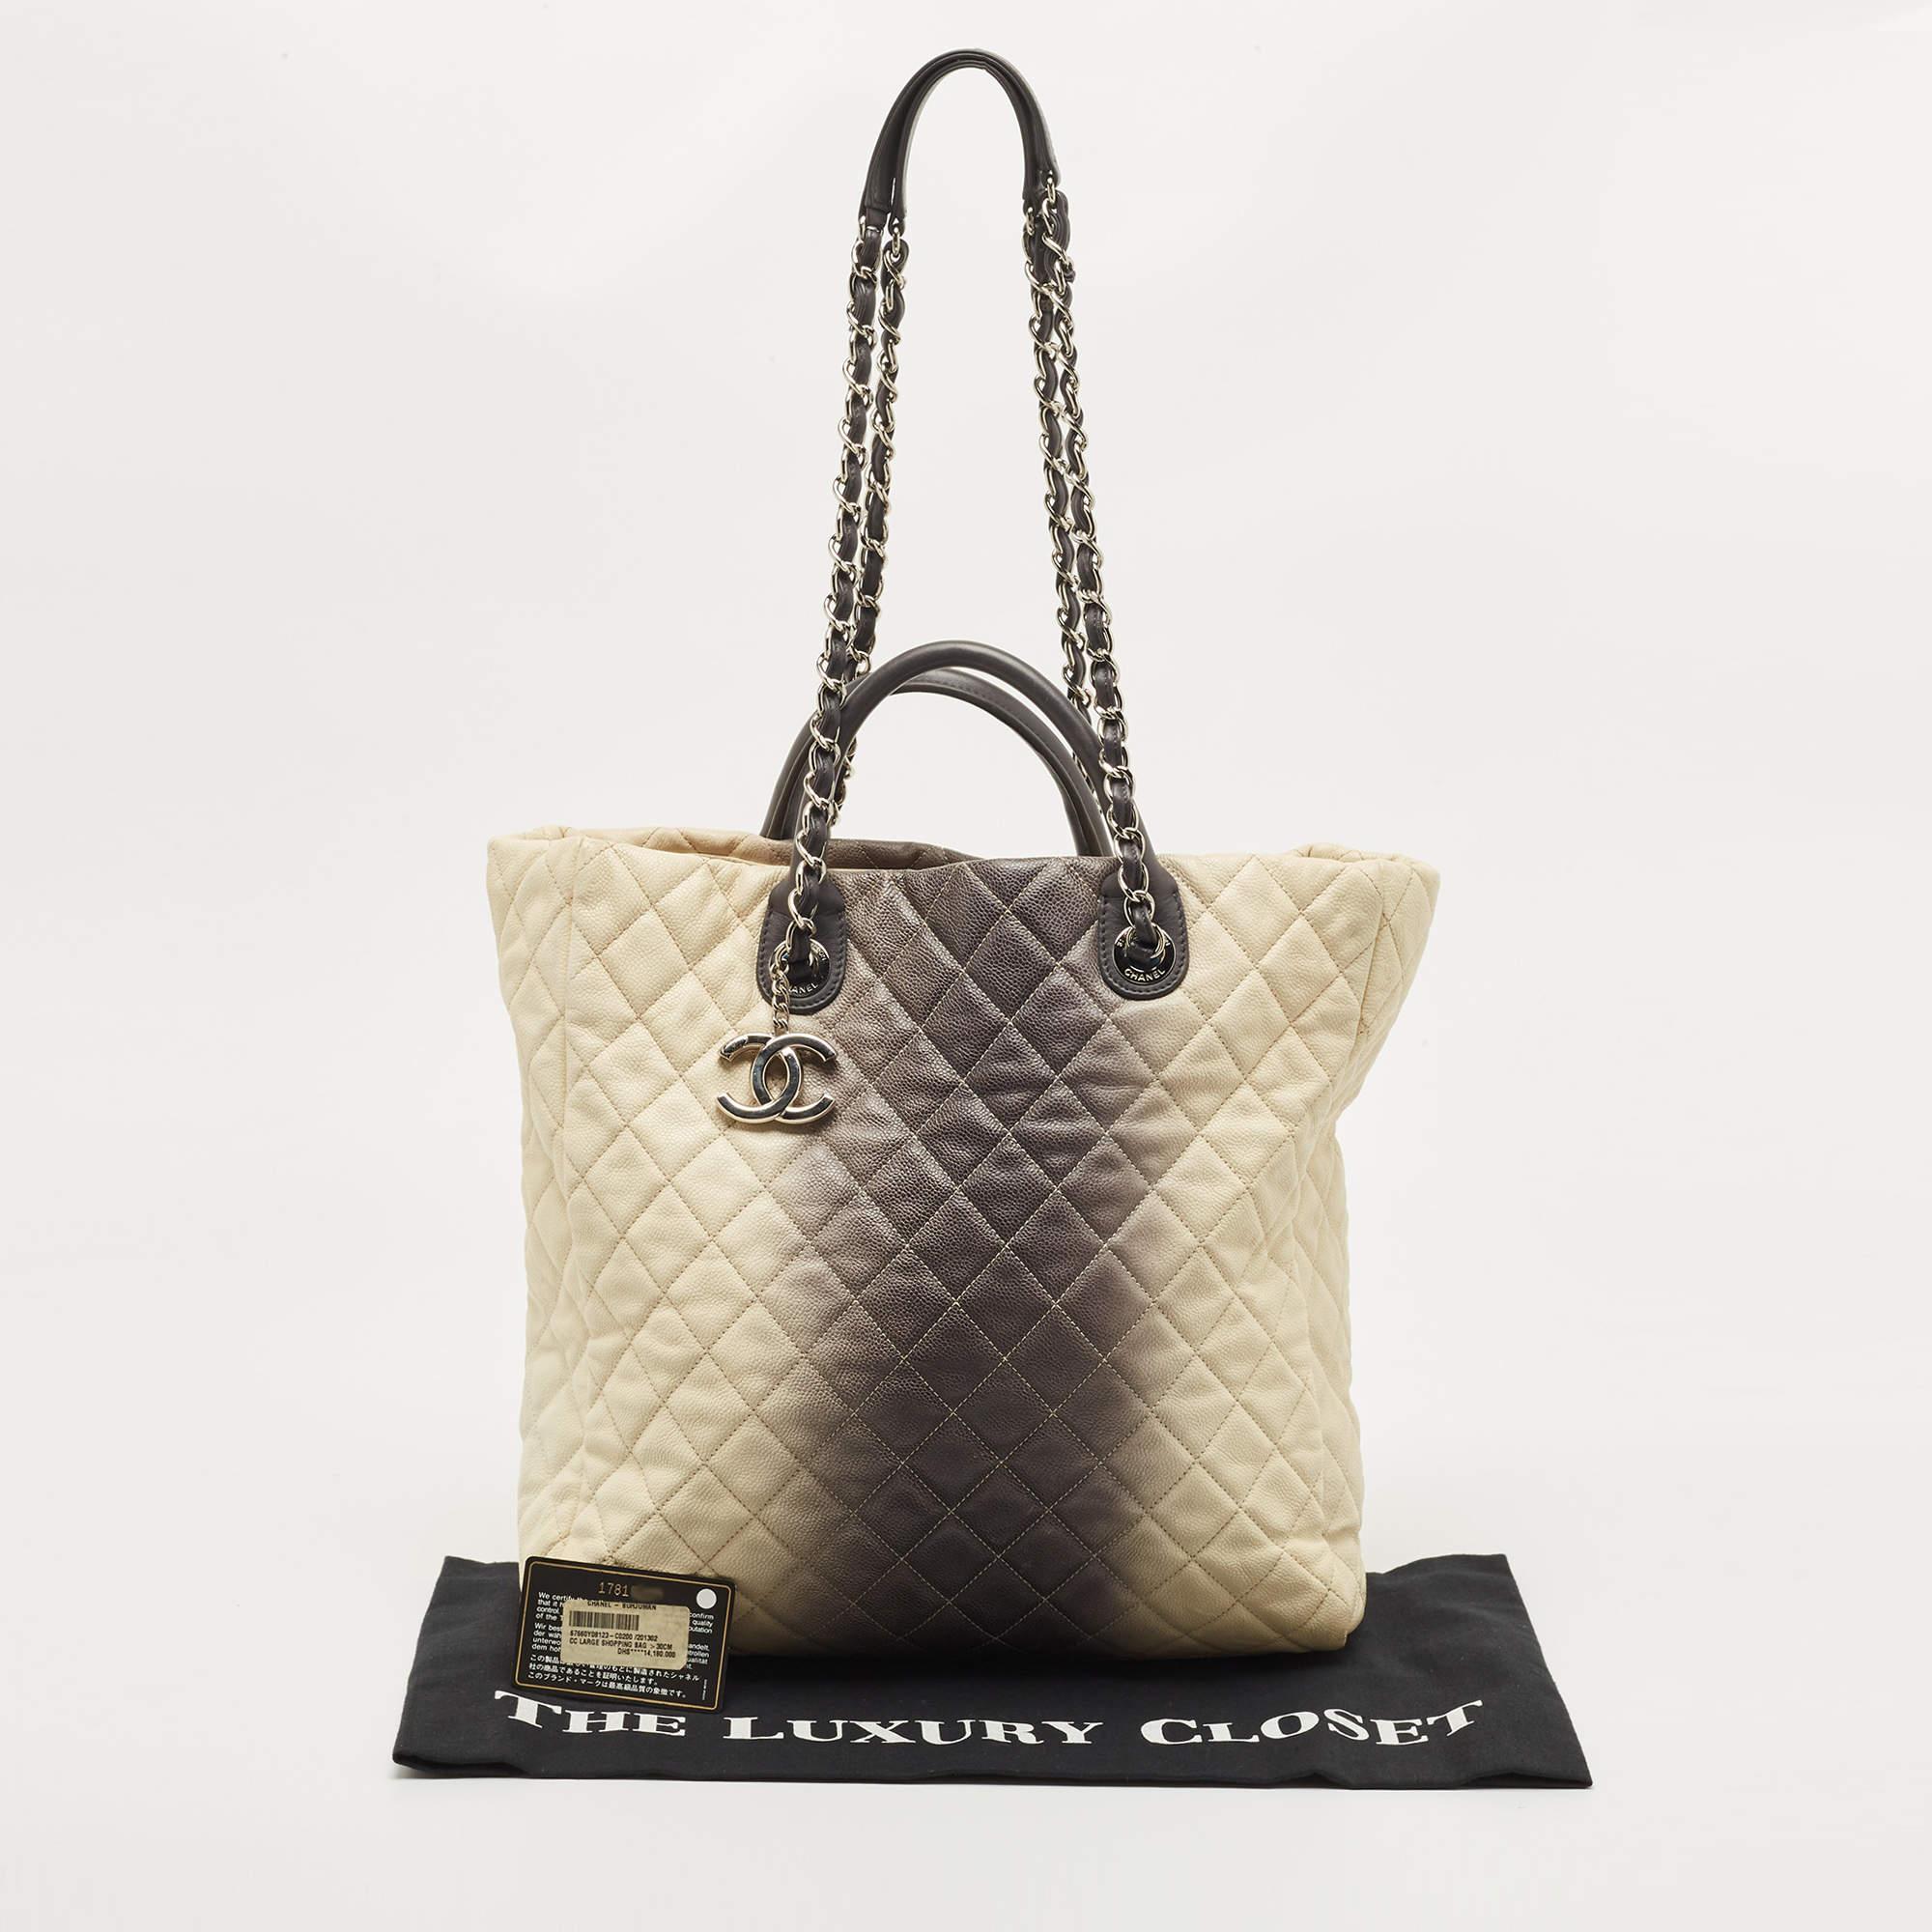 Chanel Cream/Dark Grey Ombre Quilted Caviar Leather Large Shopper Tote 13